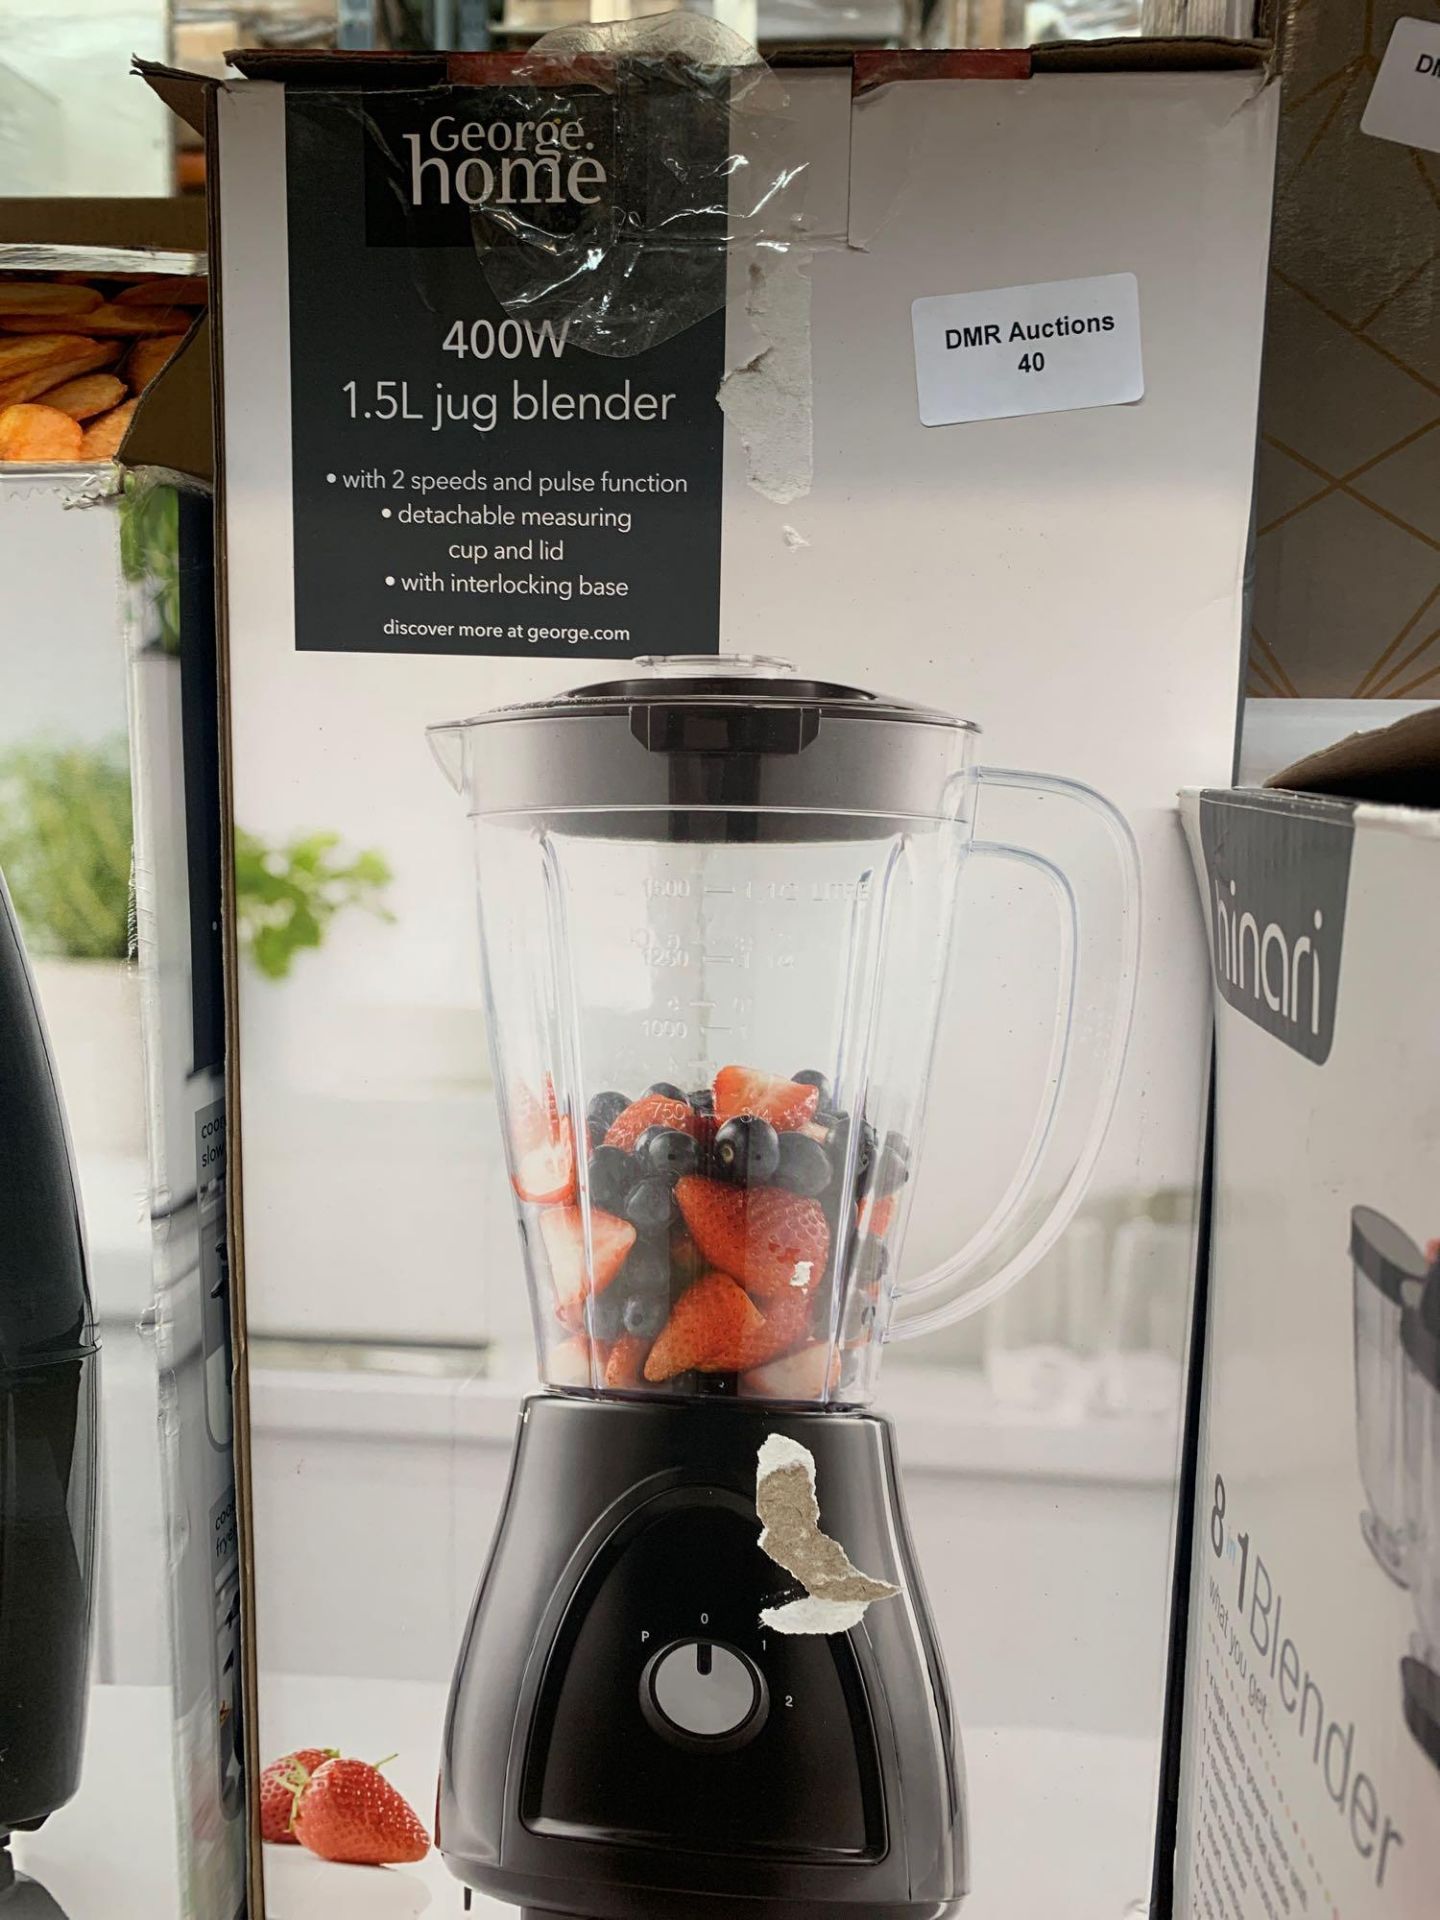 1 LOT TO CONTAIN 1 1.5 L 400W JUG BLENDER (THIS ITEM IS AN UNTESTED CUSTOMER RETURN. PUBLIC